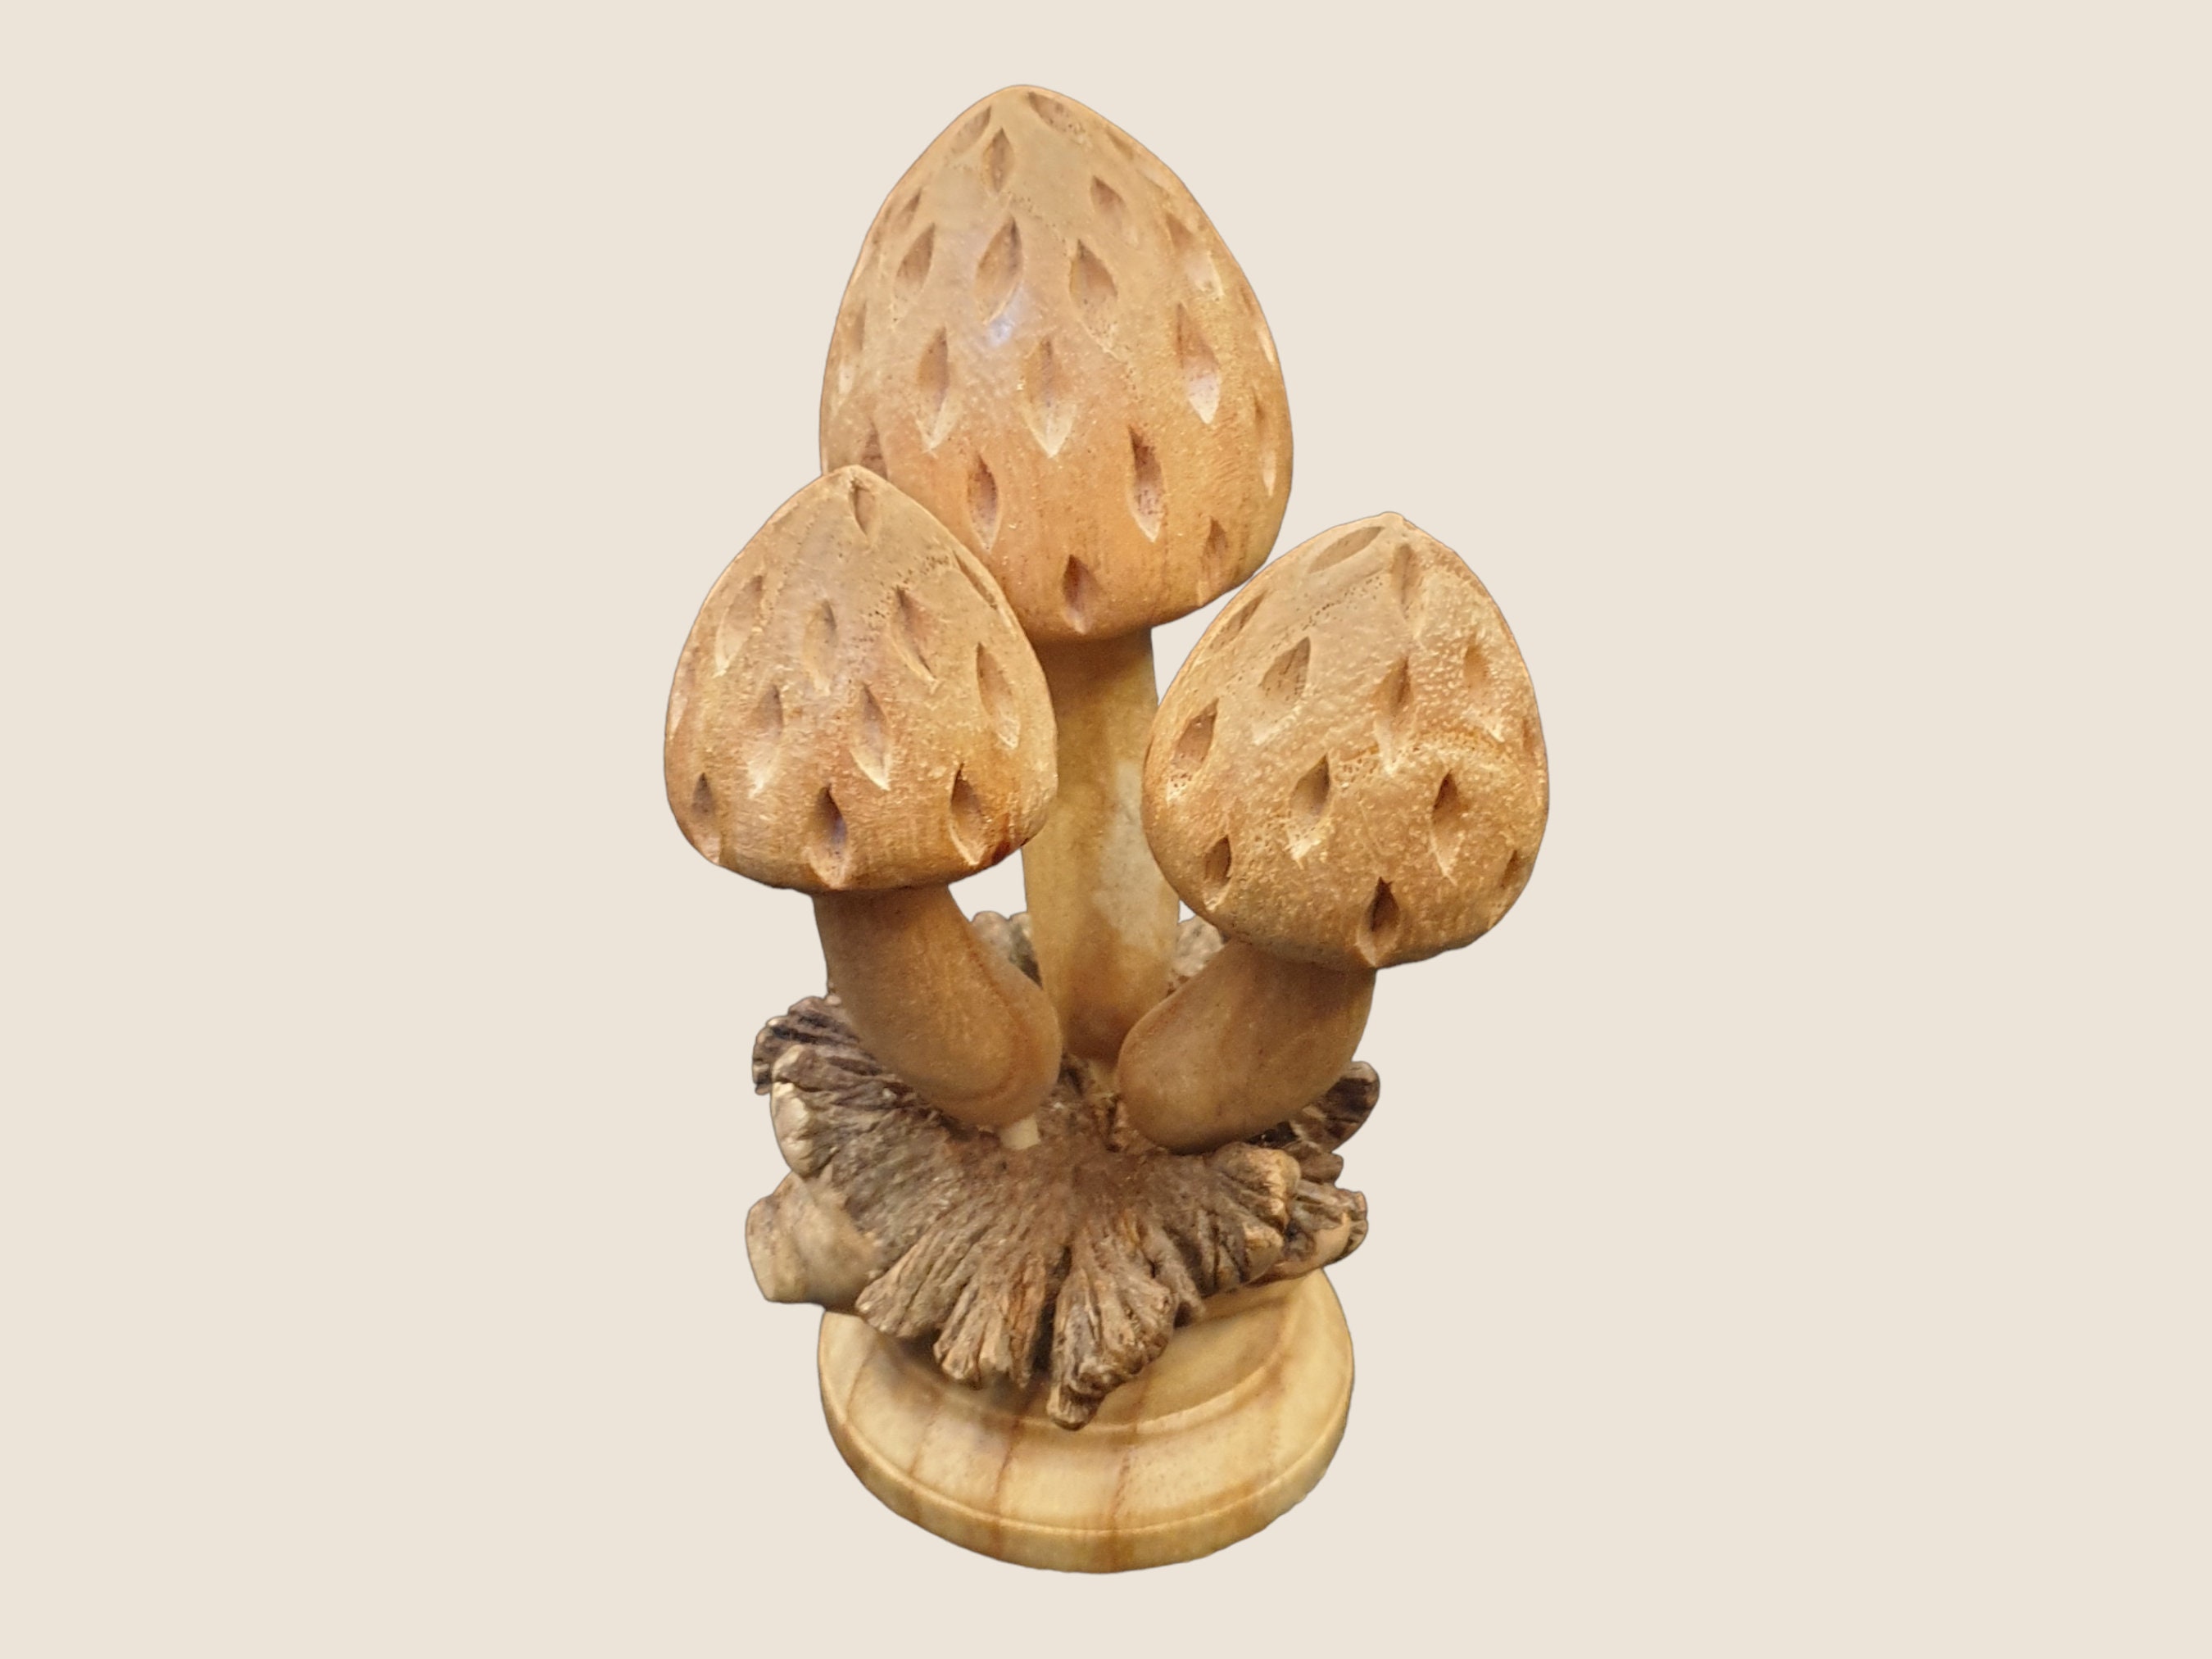 Wooden Mushrooms with parasite wood